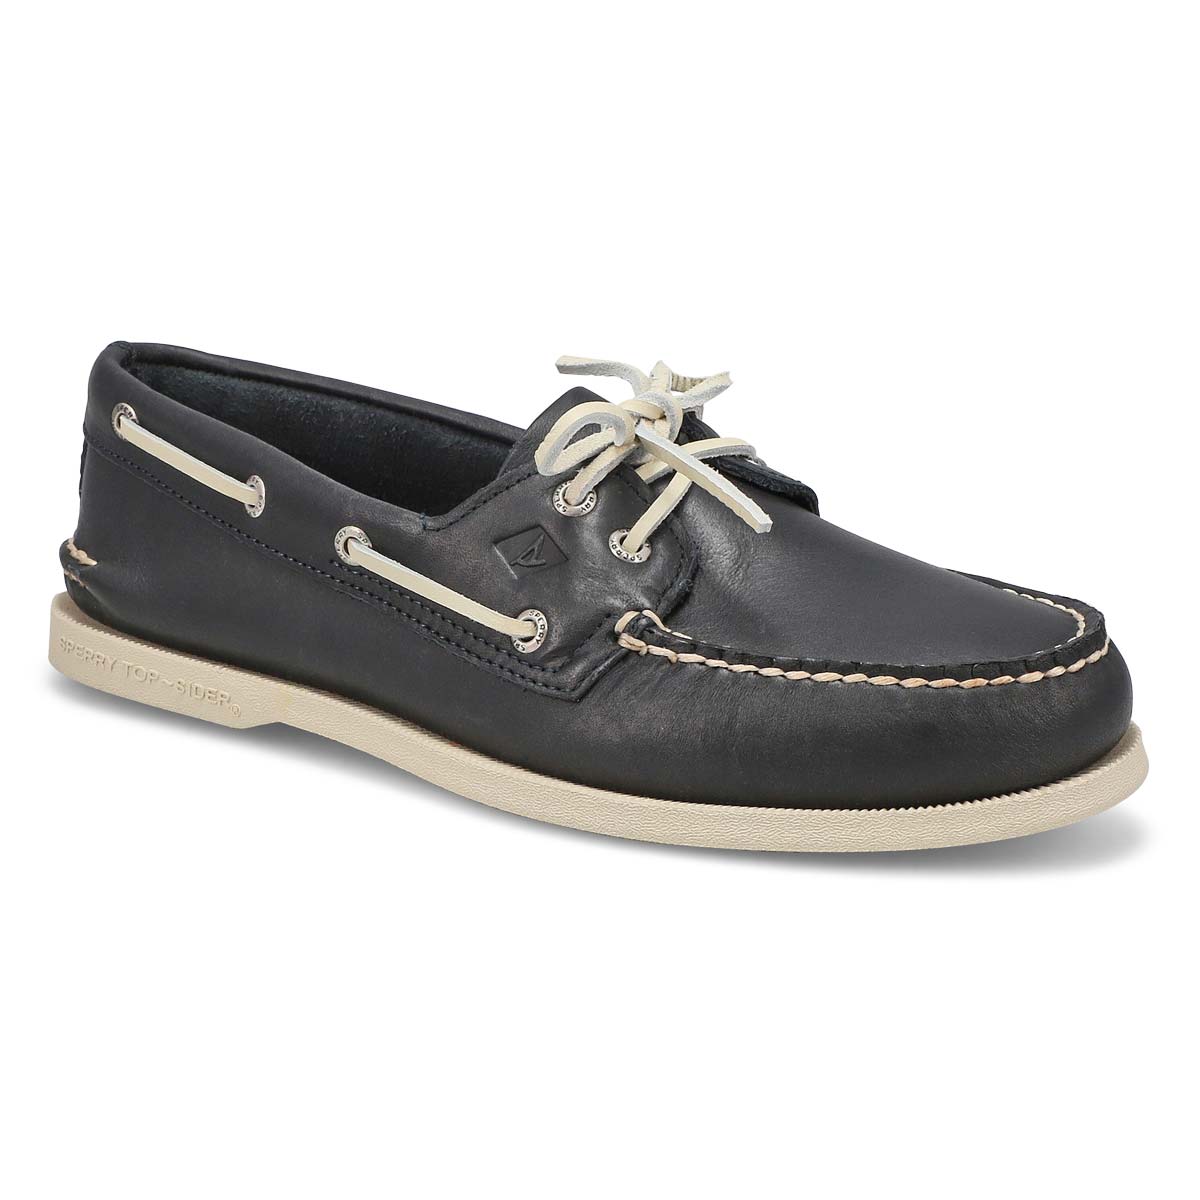 Sperry Top-Sider Bateau Marin pour Femmes 